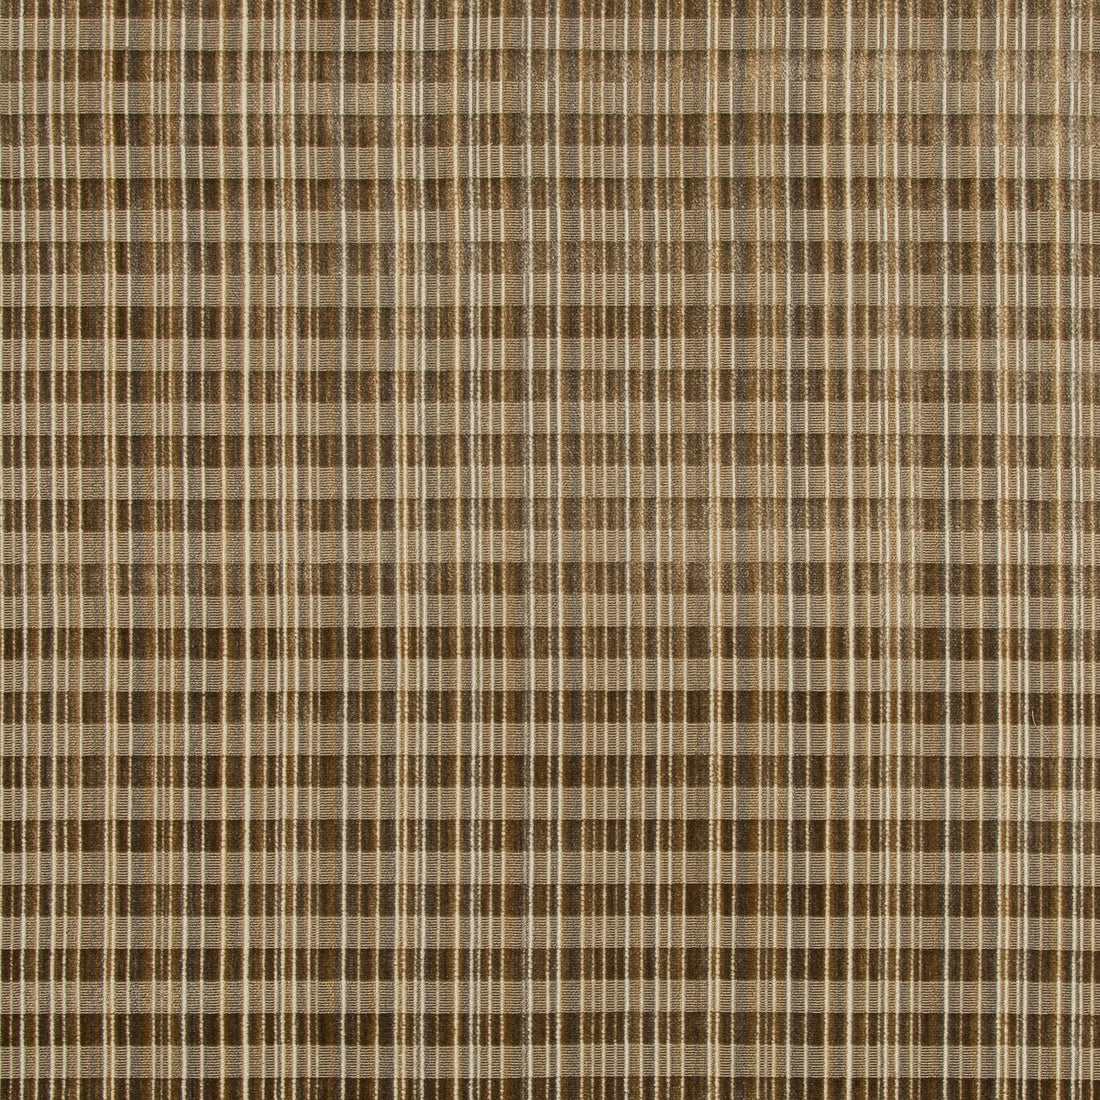 Resource Velvet fabric in espresso color - pattern 35376.416.0 - by Kravet Design in the Nate Berkus Well-Traveled collection